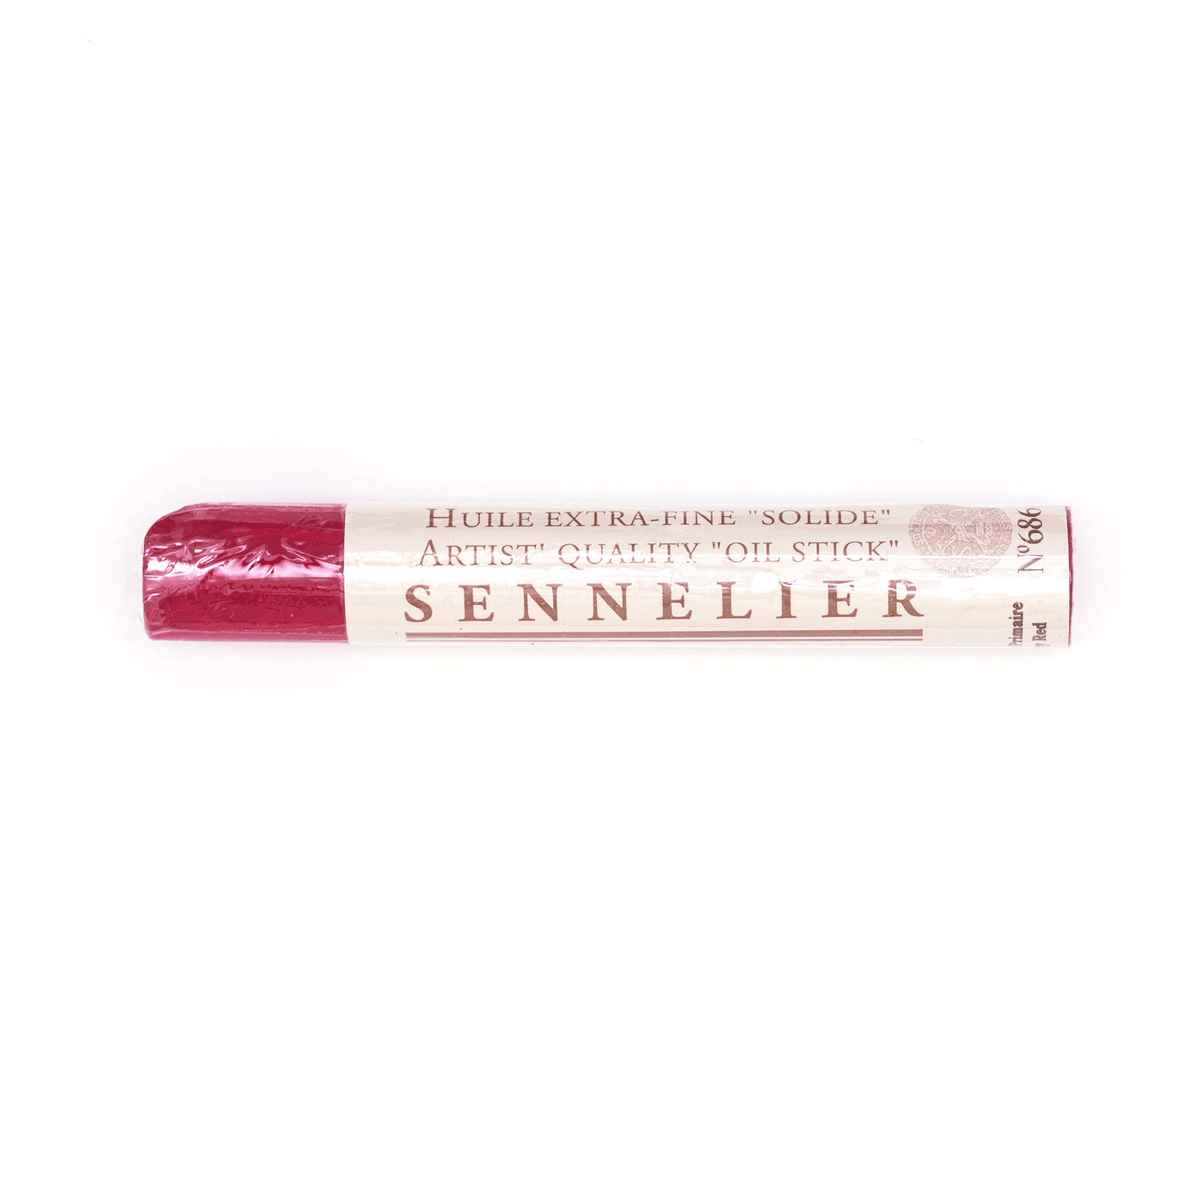 Sennelier Oil Stick, Primary Red 686